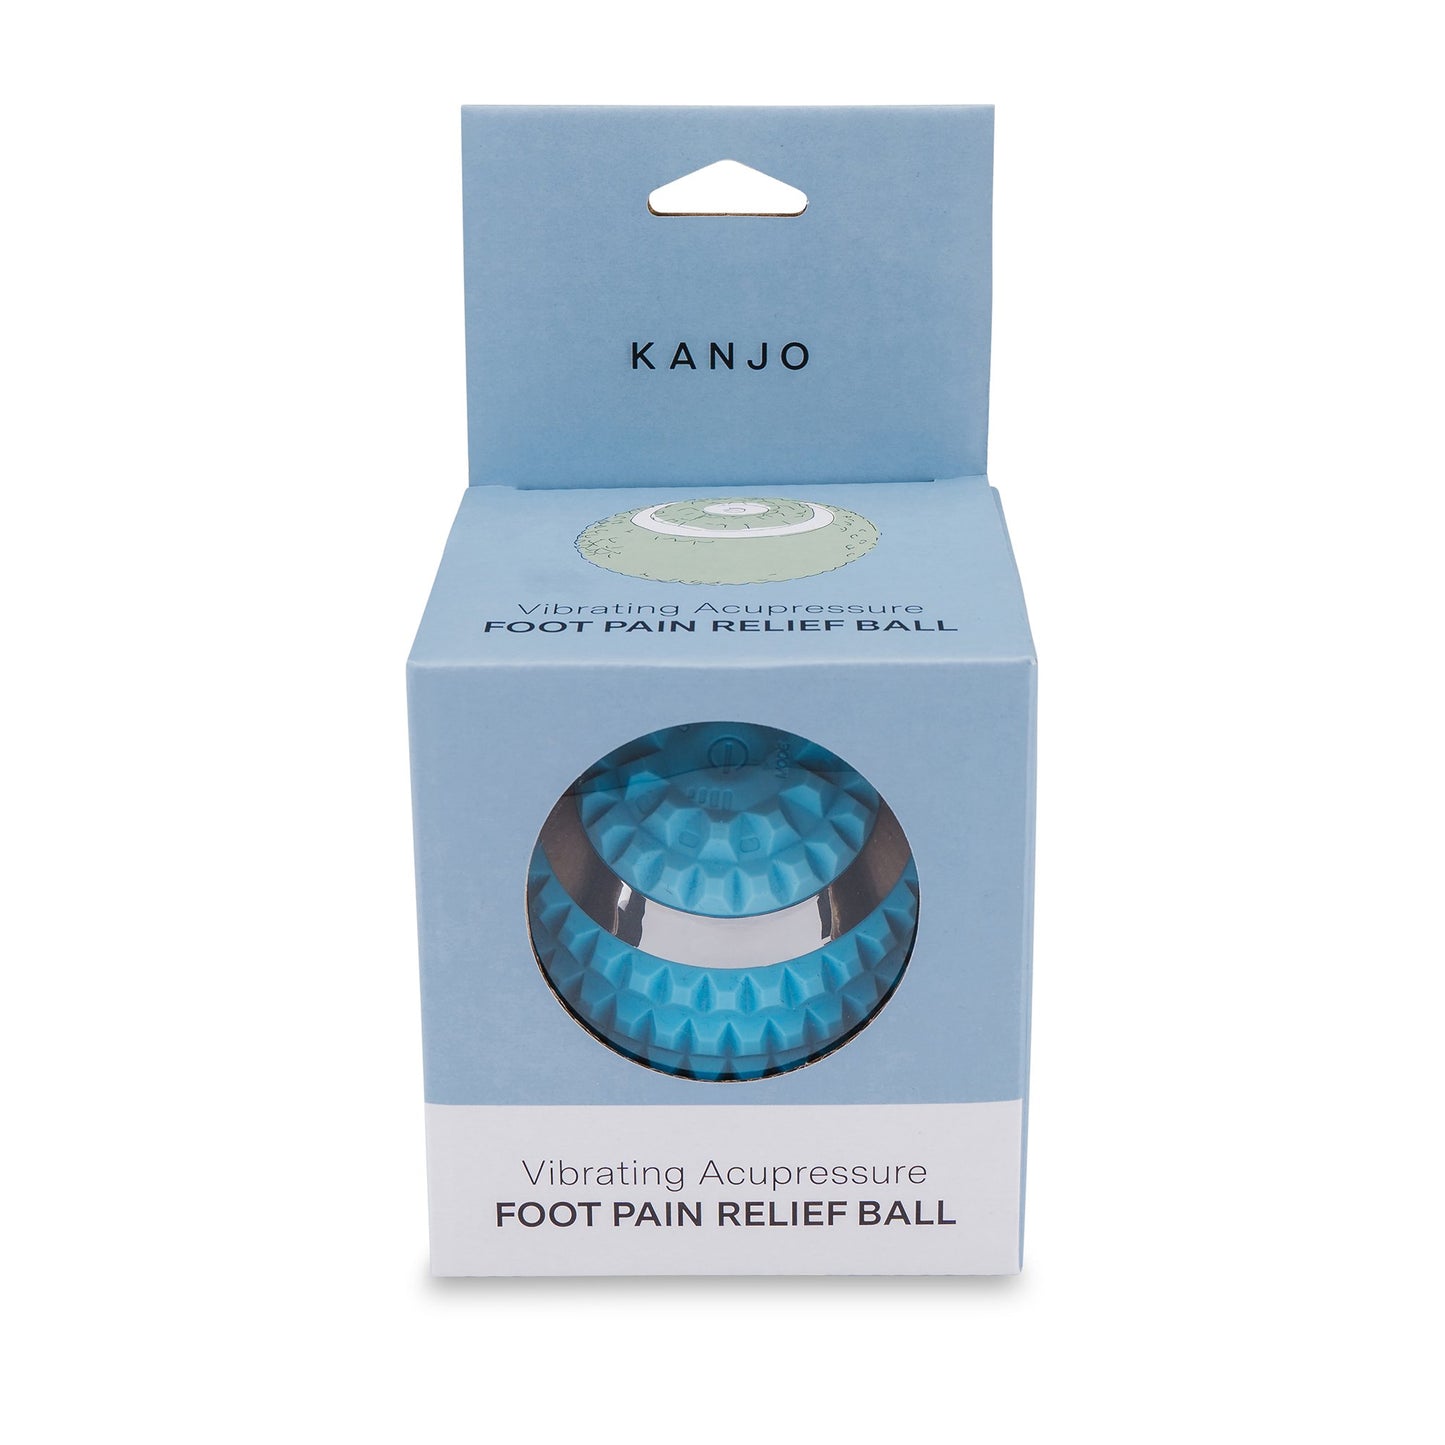 Kanjo Vibrating Acupressure Foot Pain Relief Ball, Sold As 1/Each Acutens Kanviball